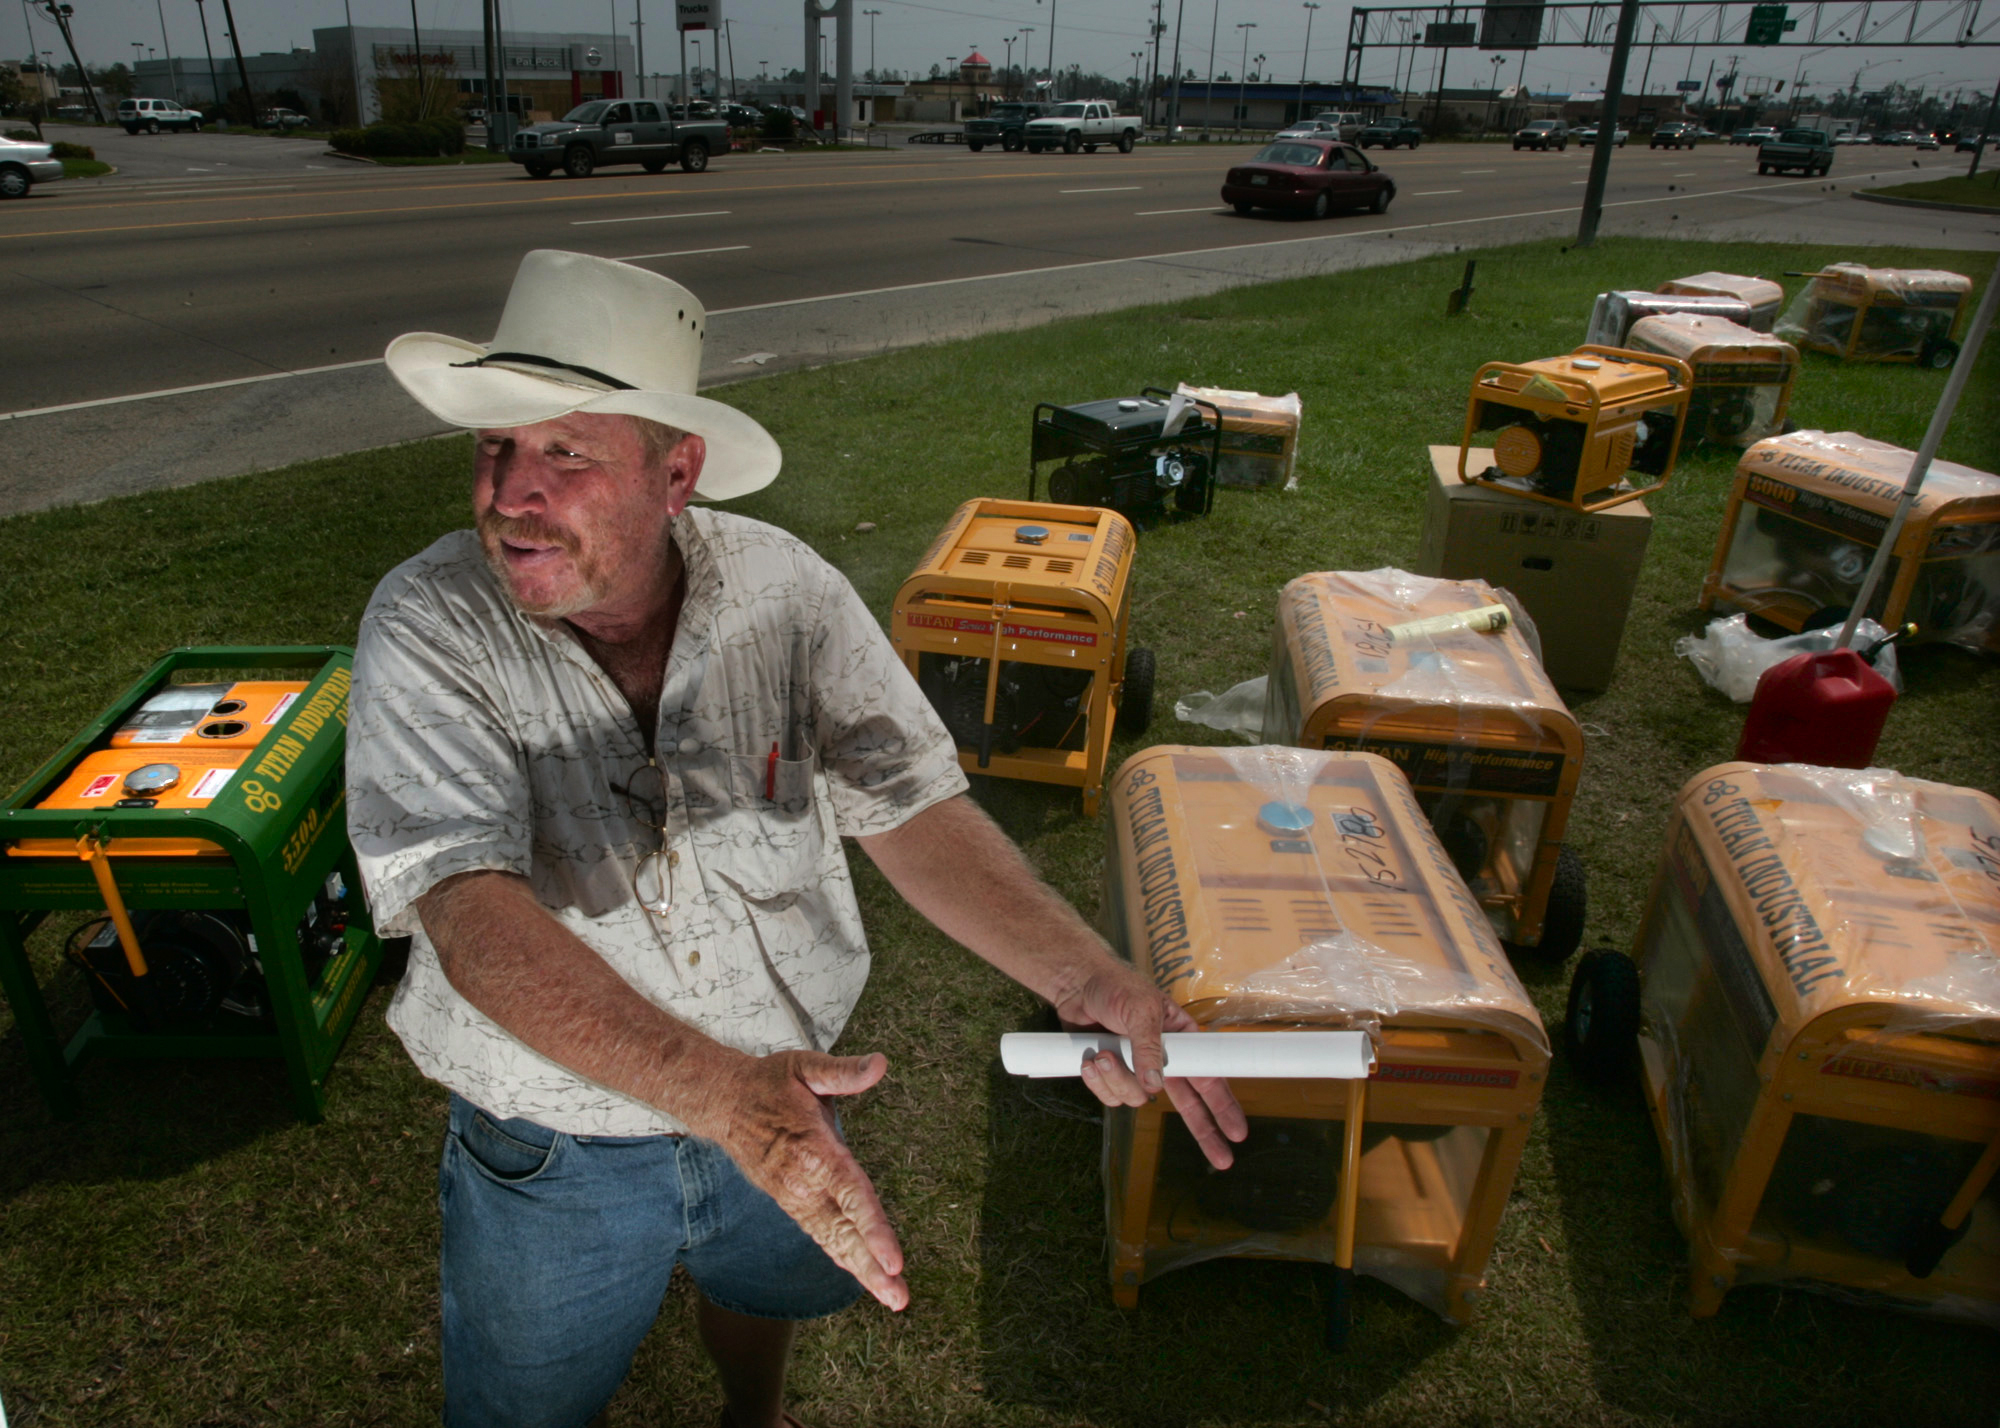 A man sets up some generators on display to sell them